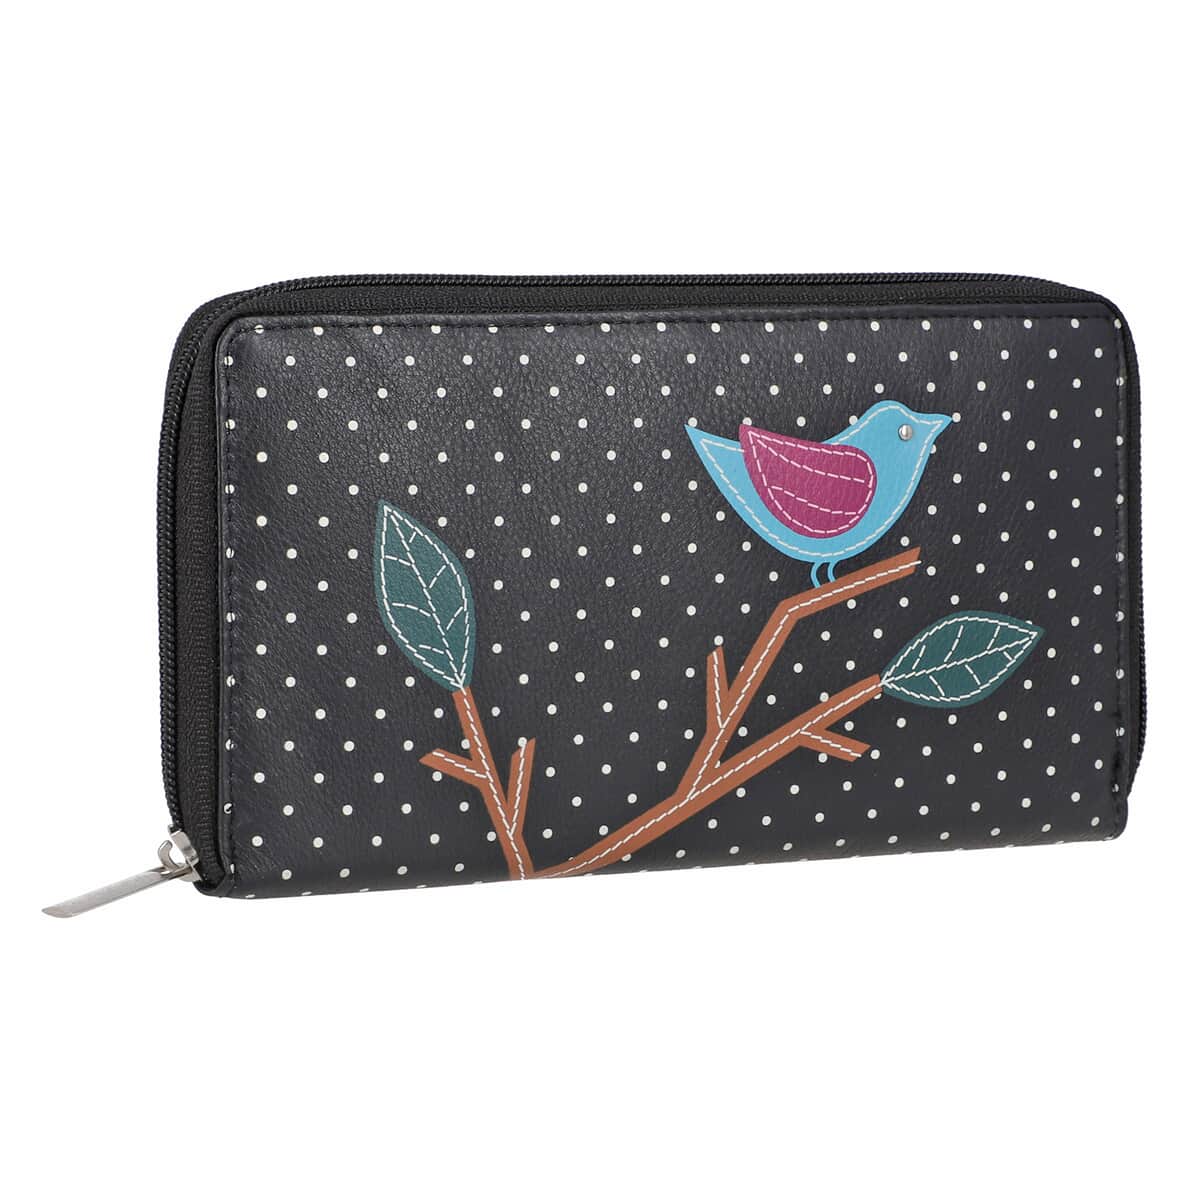 "UNION CODE -RFID Protected 100% Genuine Leather Applique Women's Wallet  THEME: Bird Sitting on Tree SIZE: 7.5(L)x4.5(W)x0.5(H) inches COLOR: black" image number 6